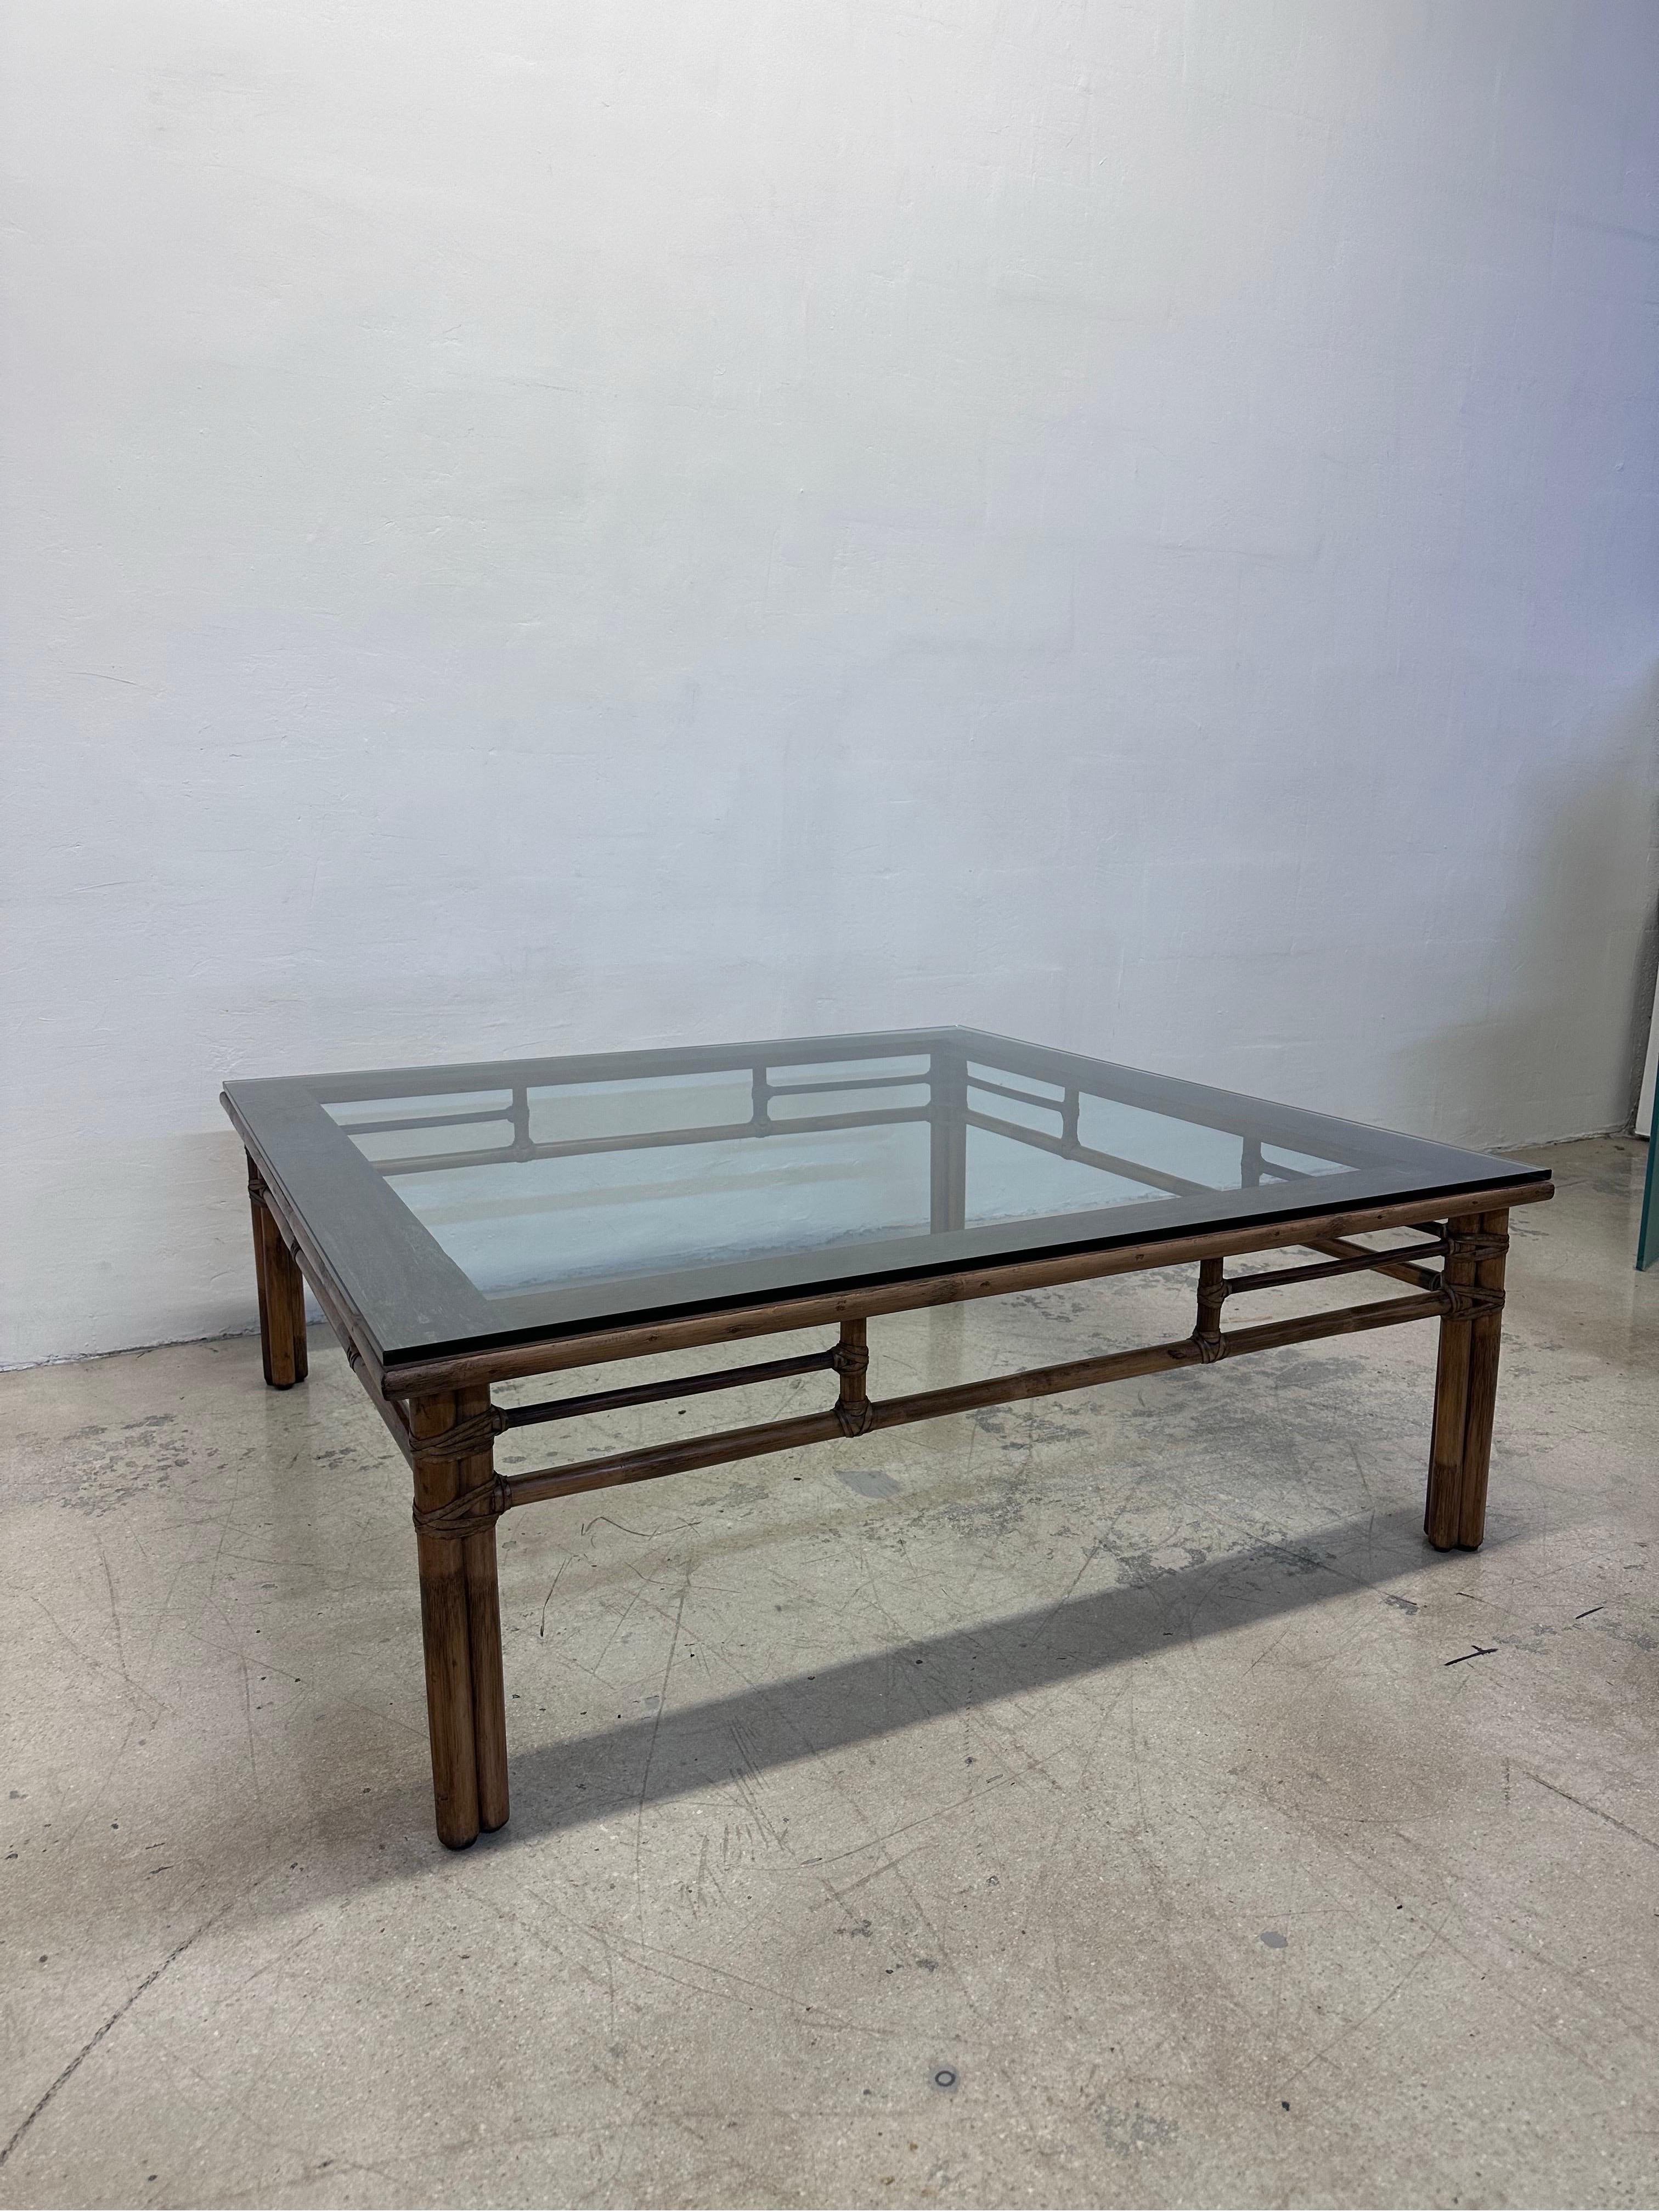 Large mid-century rattan and glass top coffee or cocktail table with raw hide straps by McGuire San Francisco.  

The glass is 47” squared and is 1/2” thick with a flat polished edge and has a slight bevel.